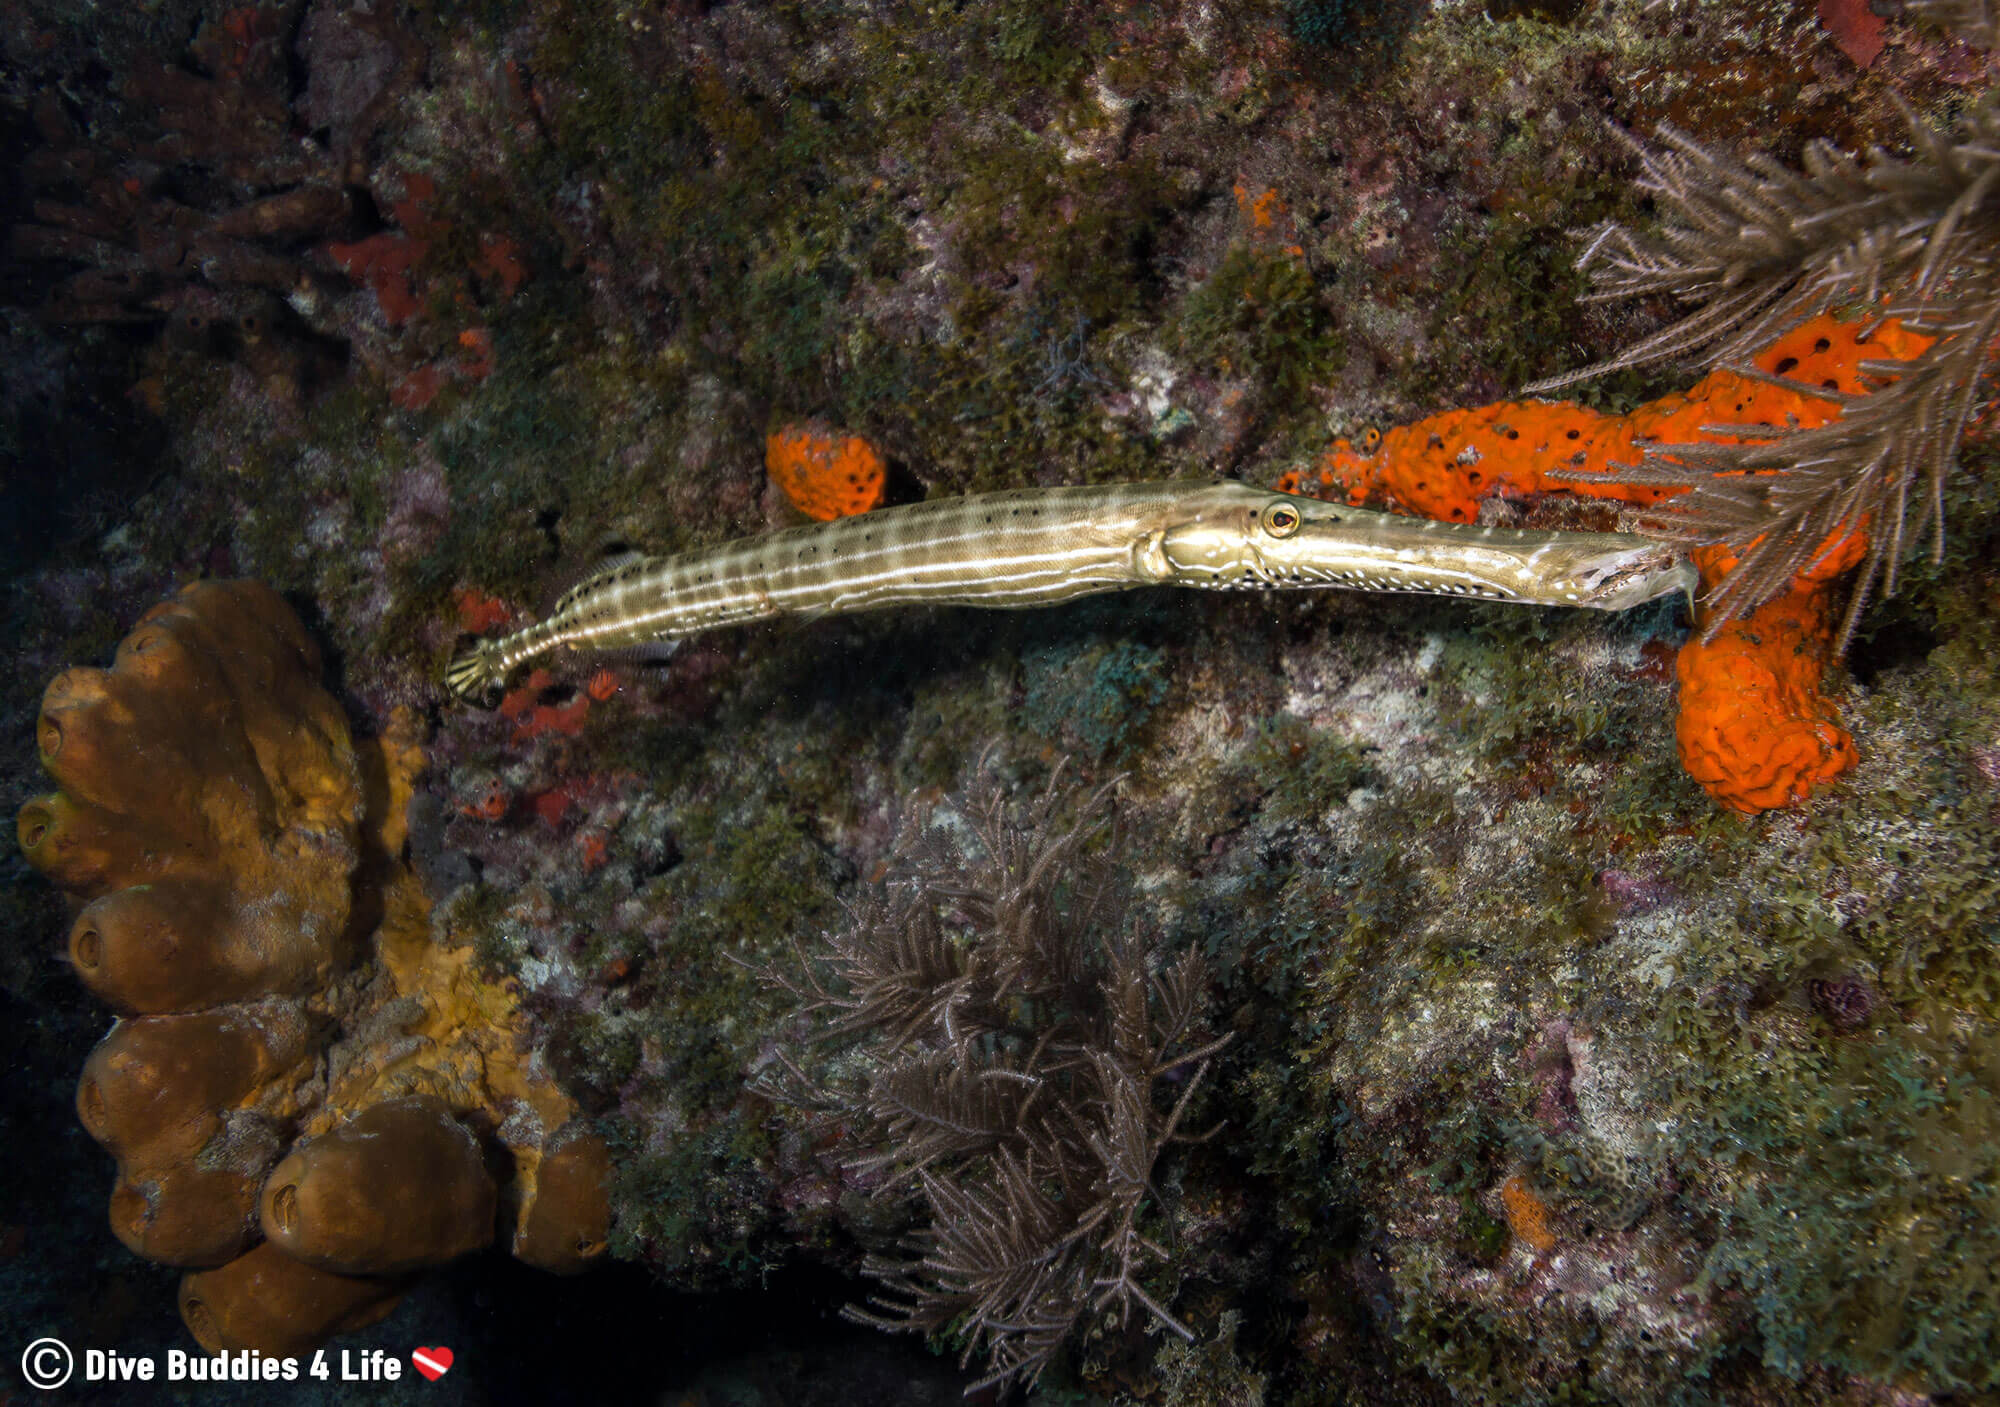 A Trumpet Fish Seen While Scuba Diving Key Largo Reef In The Florida Keys, USA